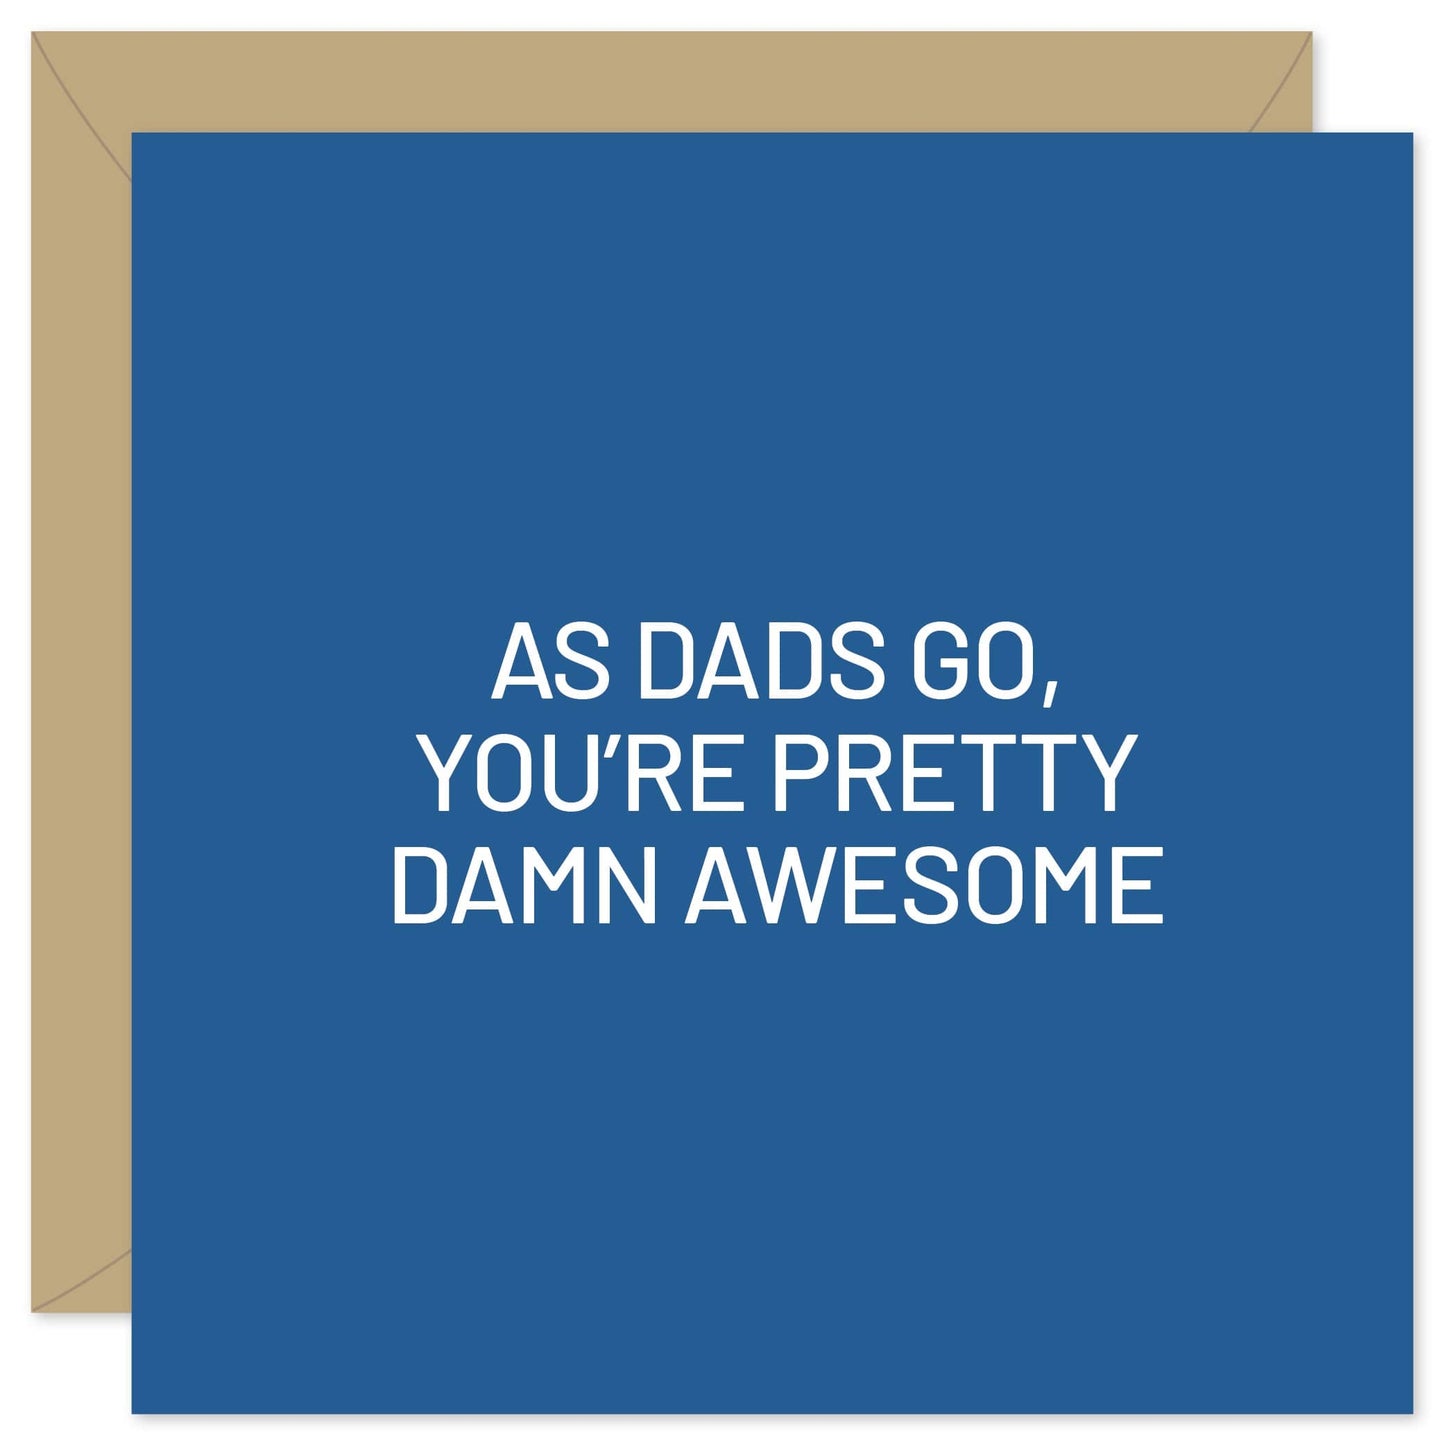 As dads go you are awesome card from Purple Tree Designs